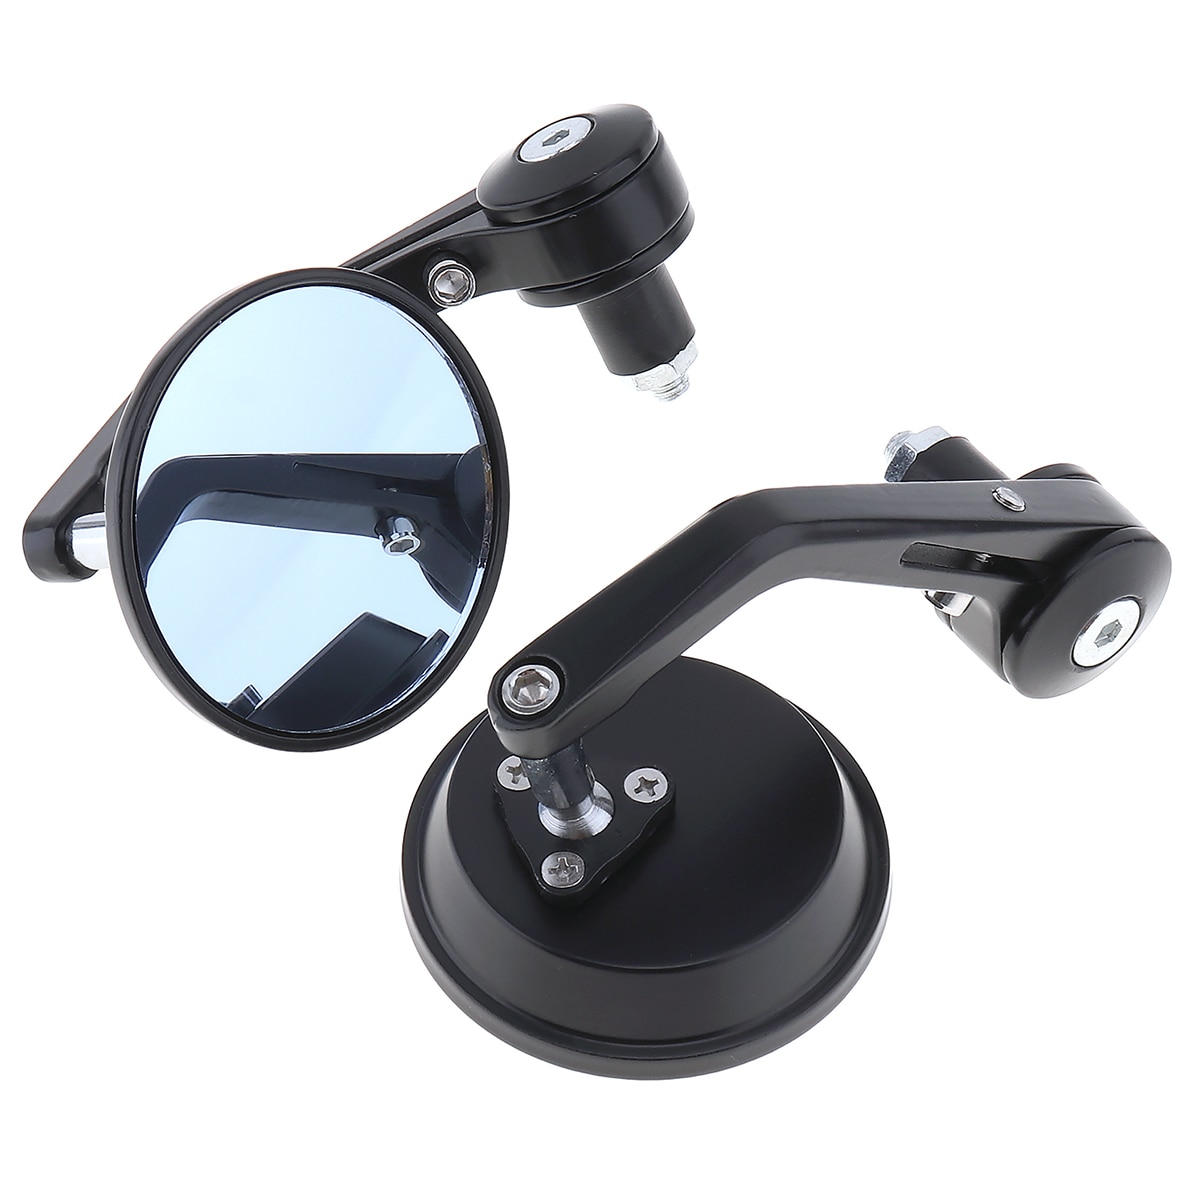 2Pcs-Universal-7-8-22mm-Bar-End-Rear-Mirrors-Motorcycle-Accessories-Motorbike-Scooters-Rearview-Mirror-Side-7